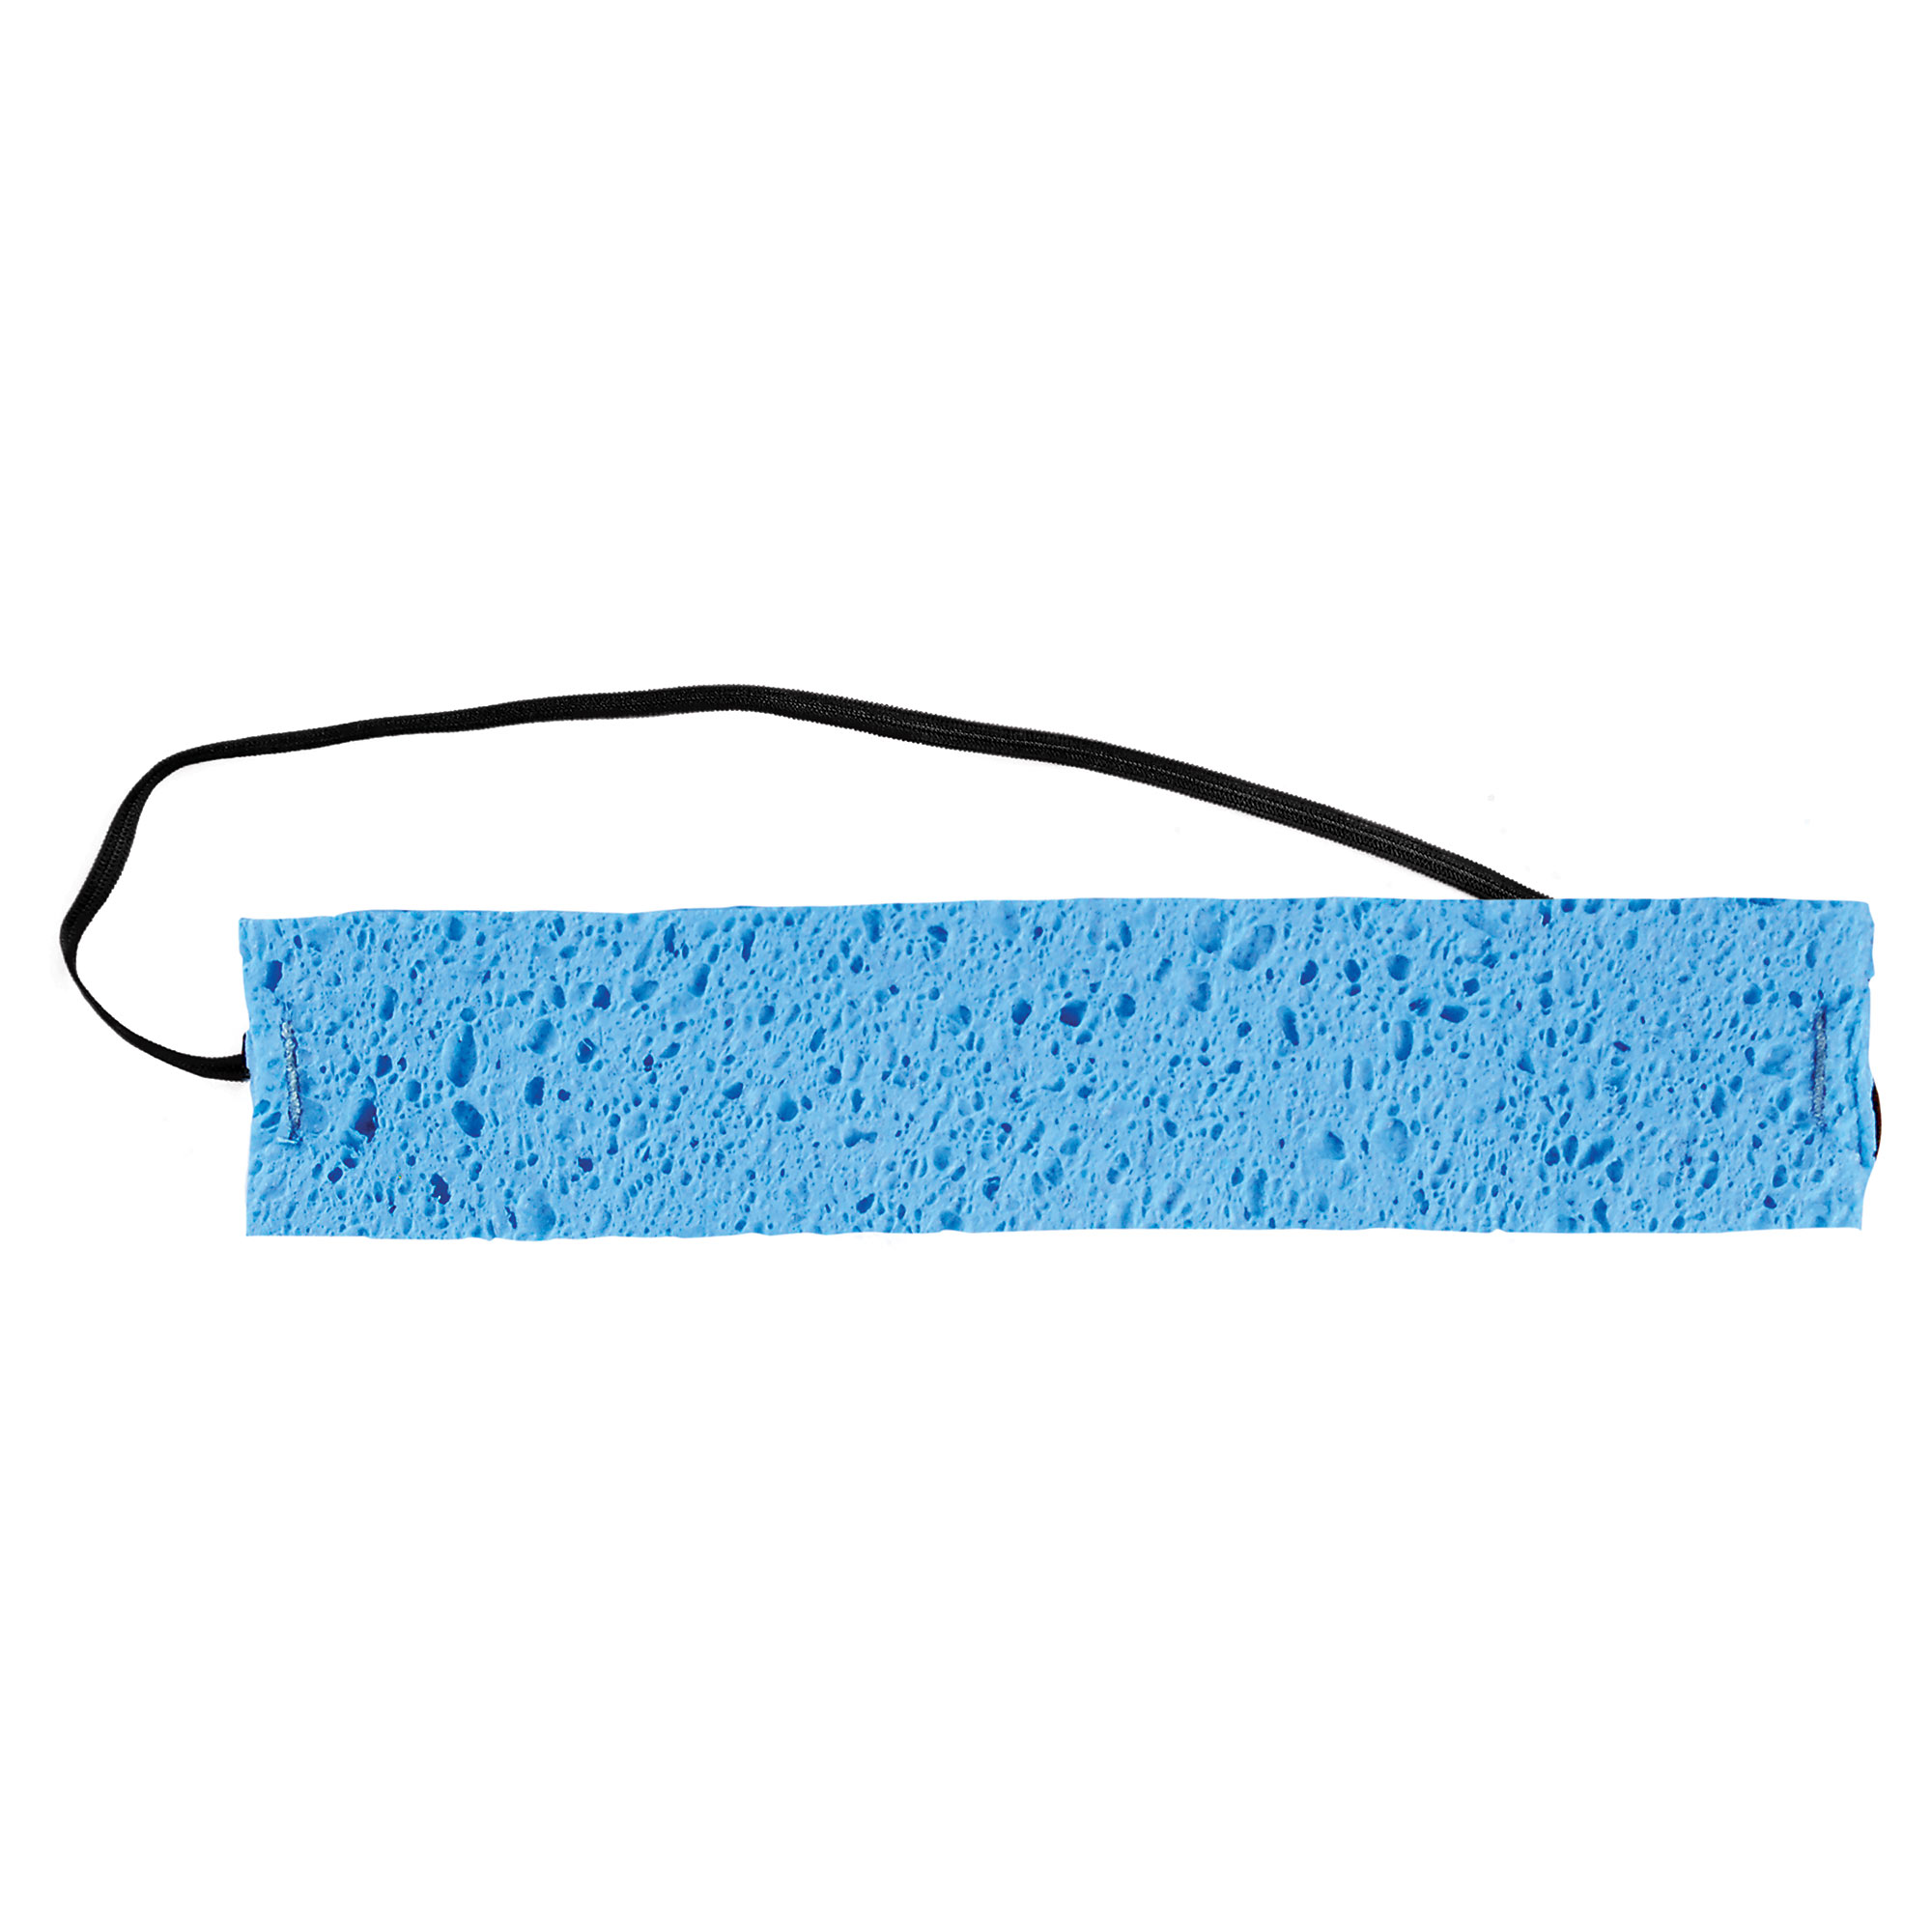 Details about   2 bands FOR $2.00 Occunomix SBR25  Absorbent Cellulose Sweatbands.free shipping 